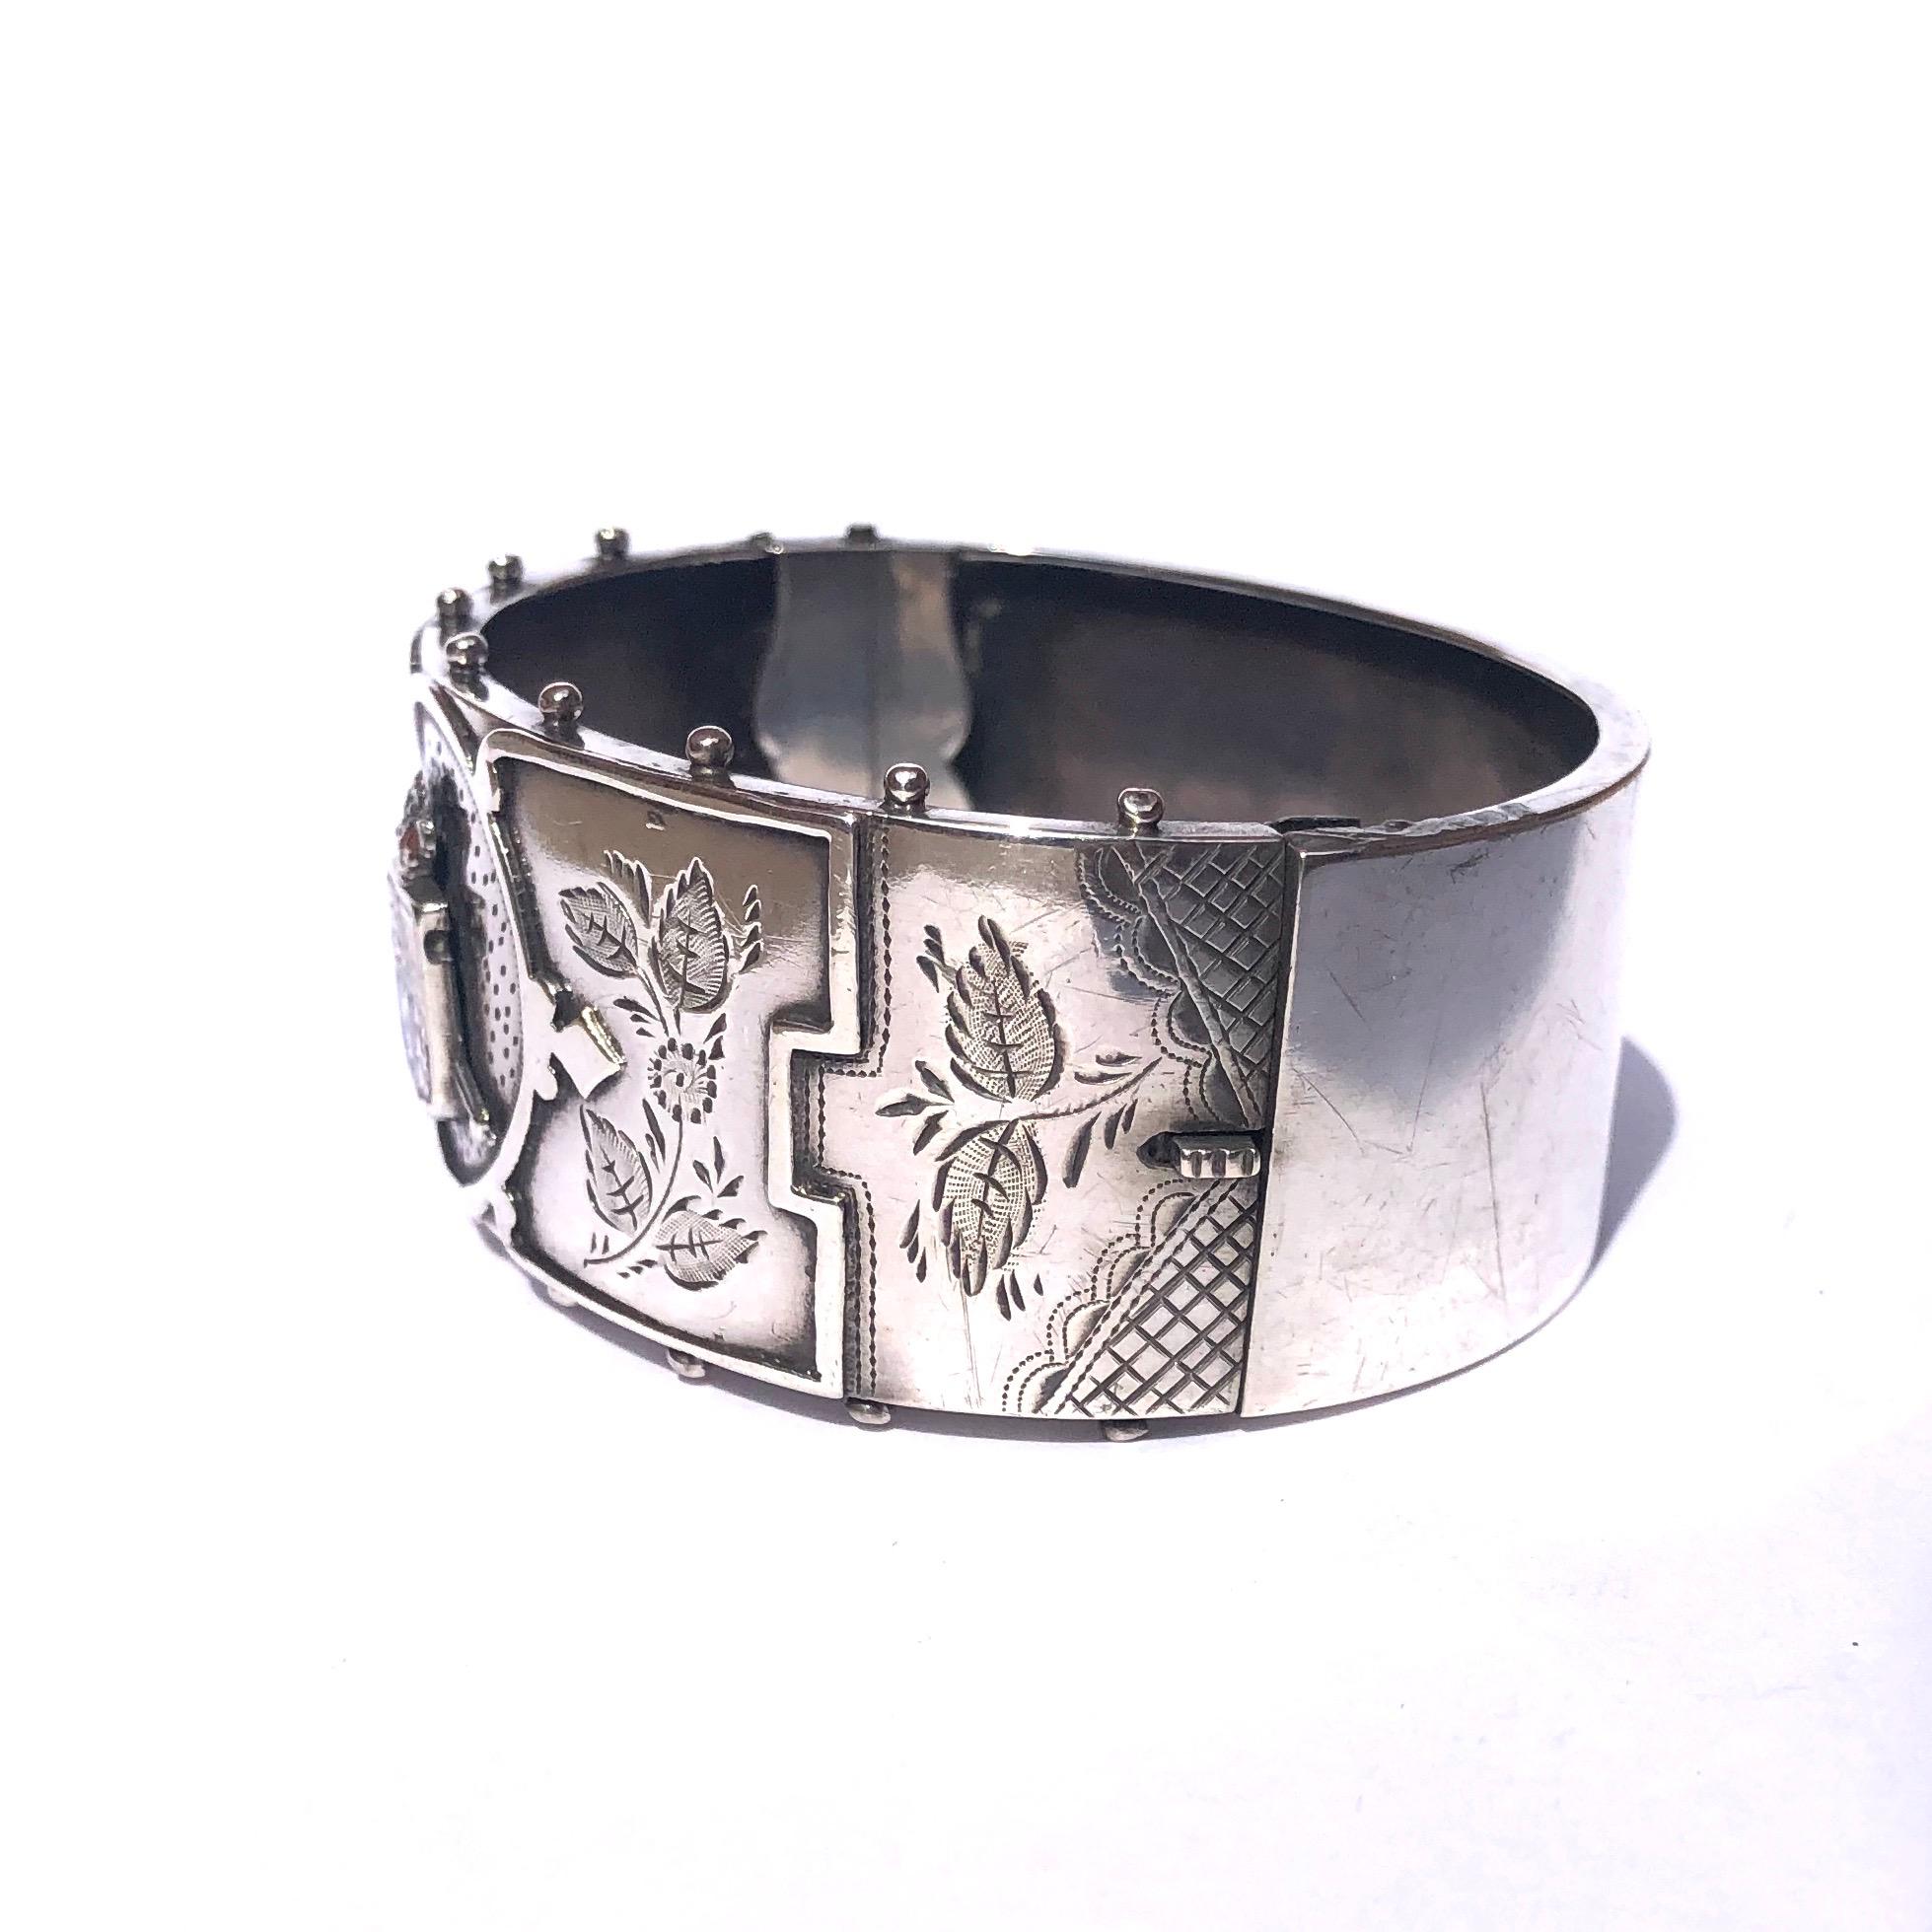 This silver bangle has exquisite engraving and placed at the centre of the front panel is a coat of arms with yellow, red and blue enamel. Around the edge of the front panel there is also beaded detail. 

Inner Diameter: 56mm
Bangle Width: